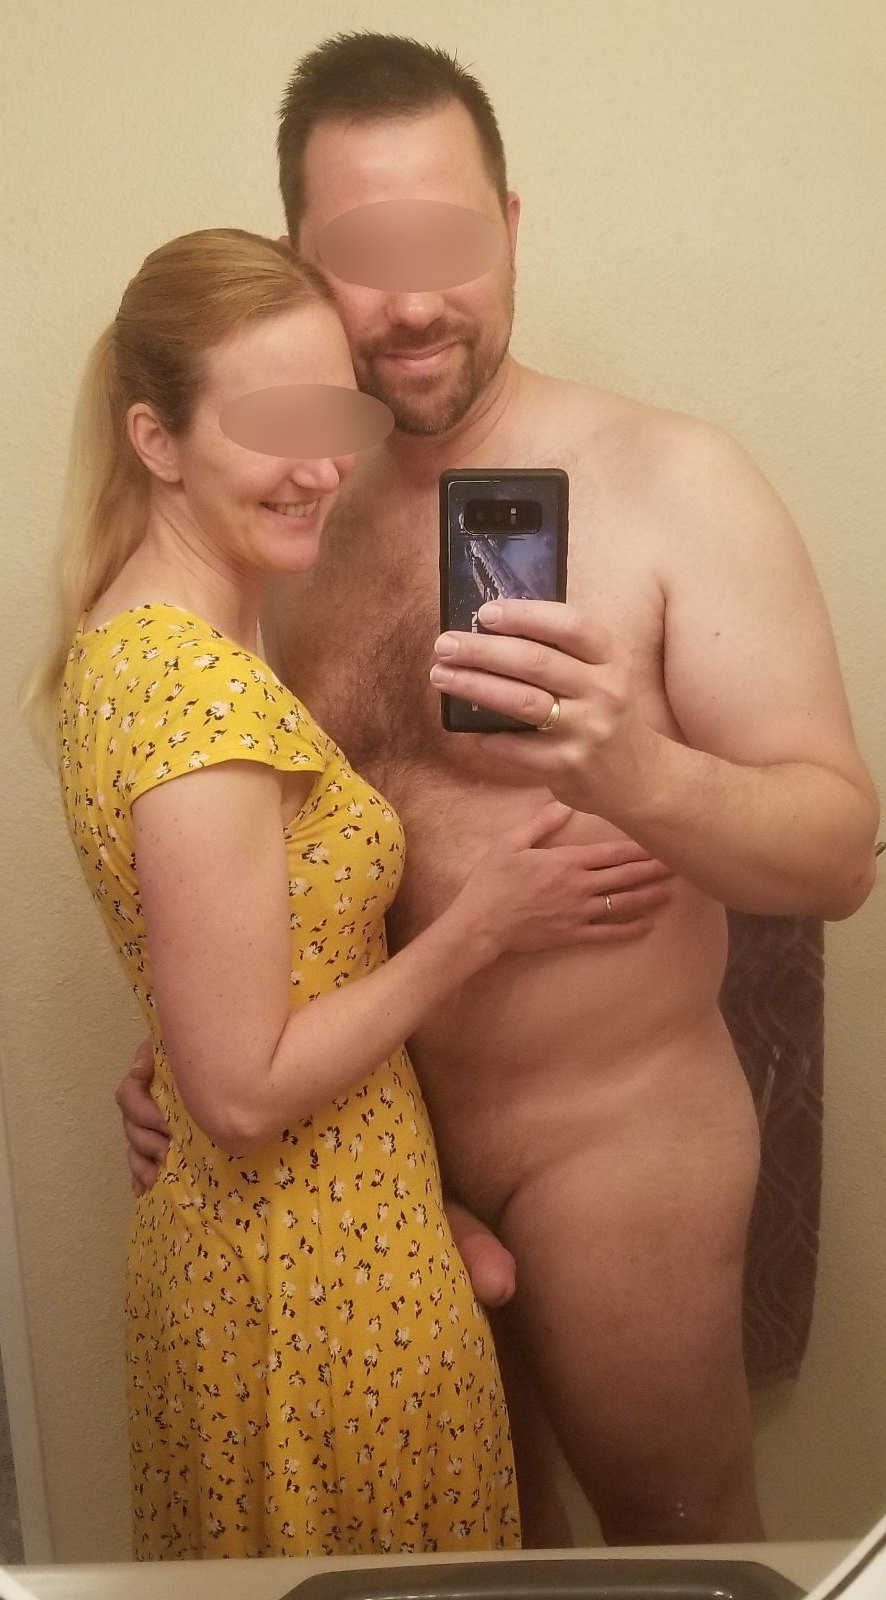 amateur porn, CFNM photo, wife with a naked